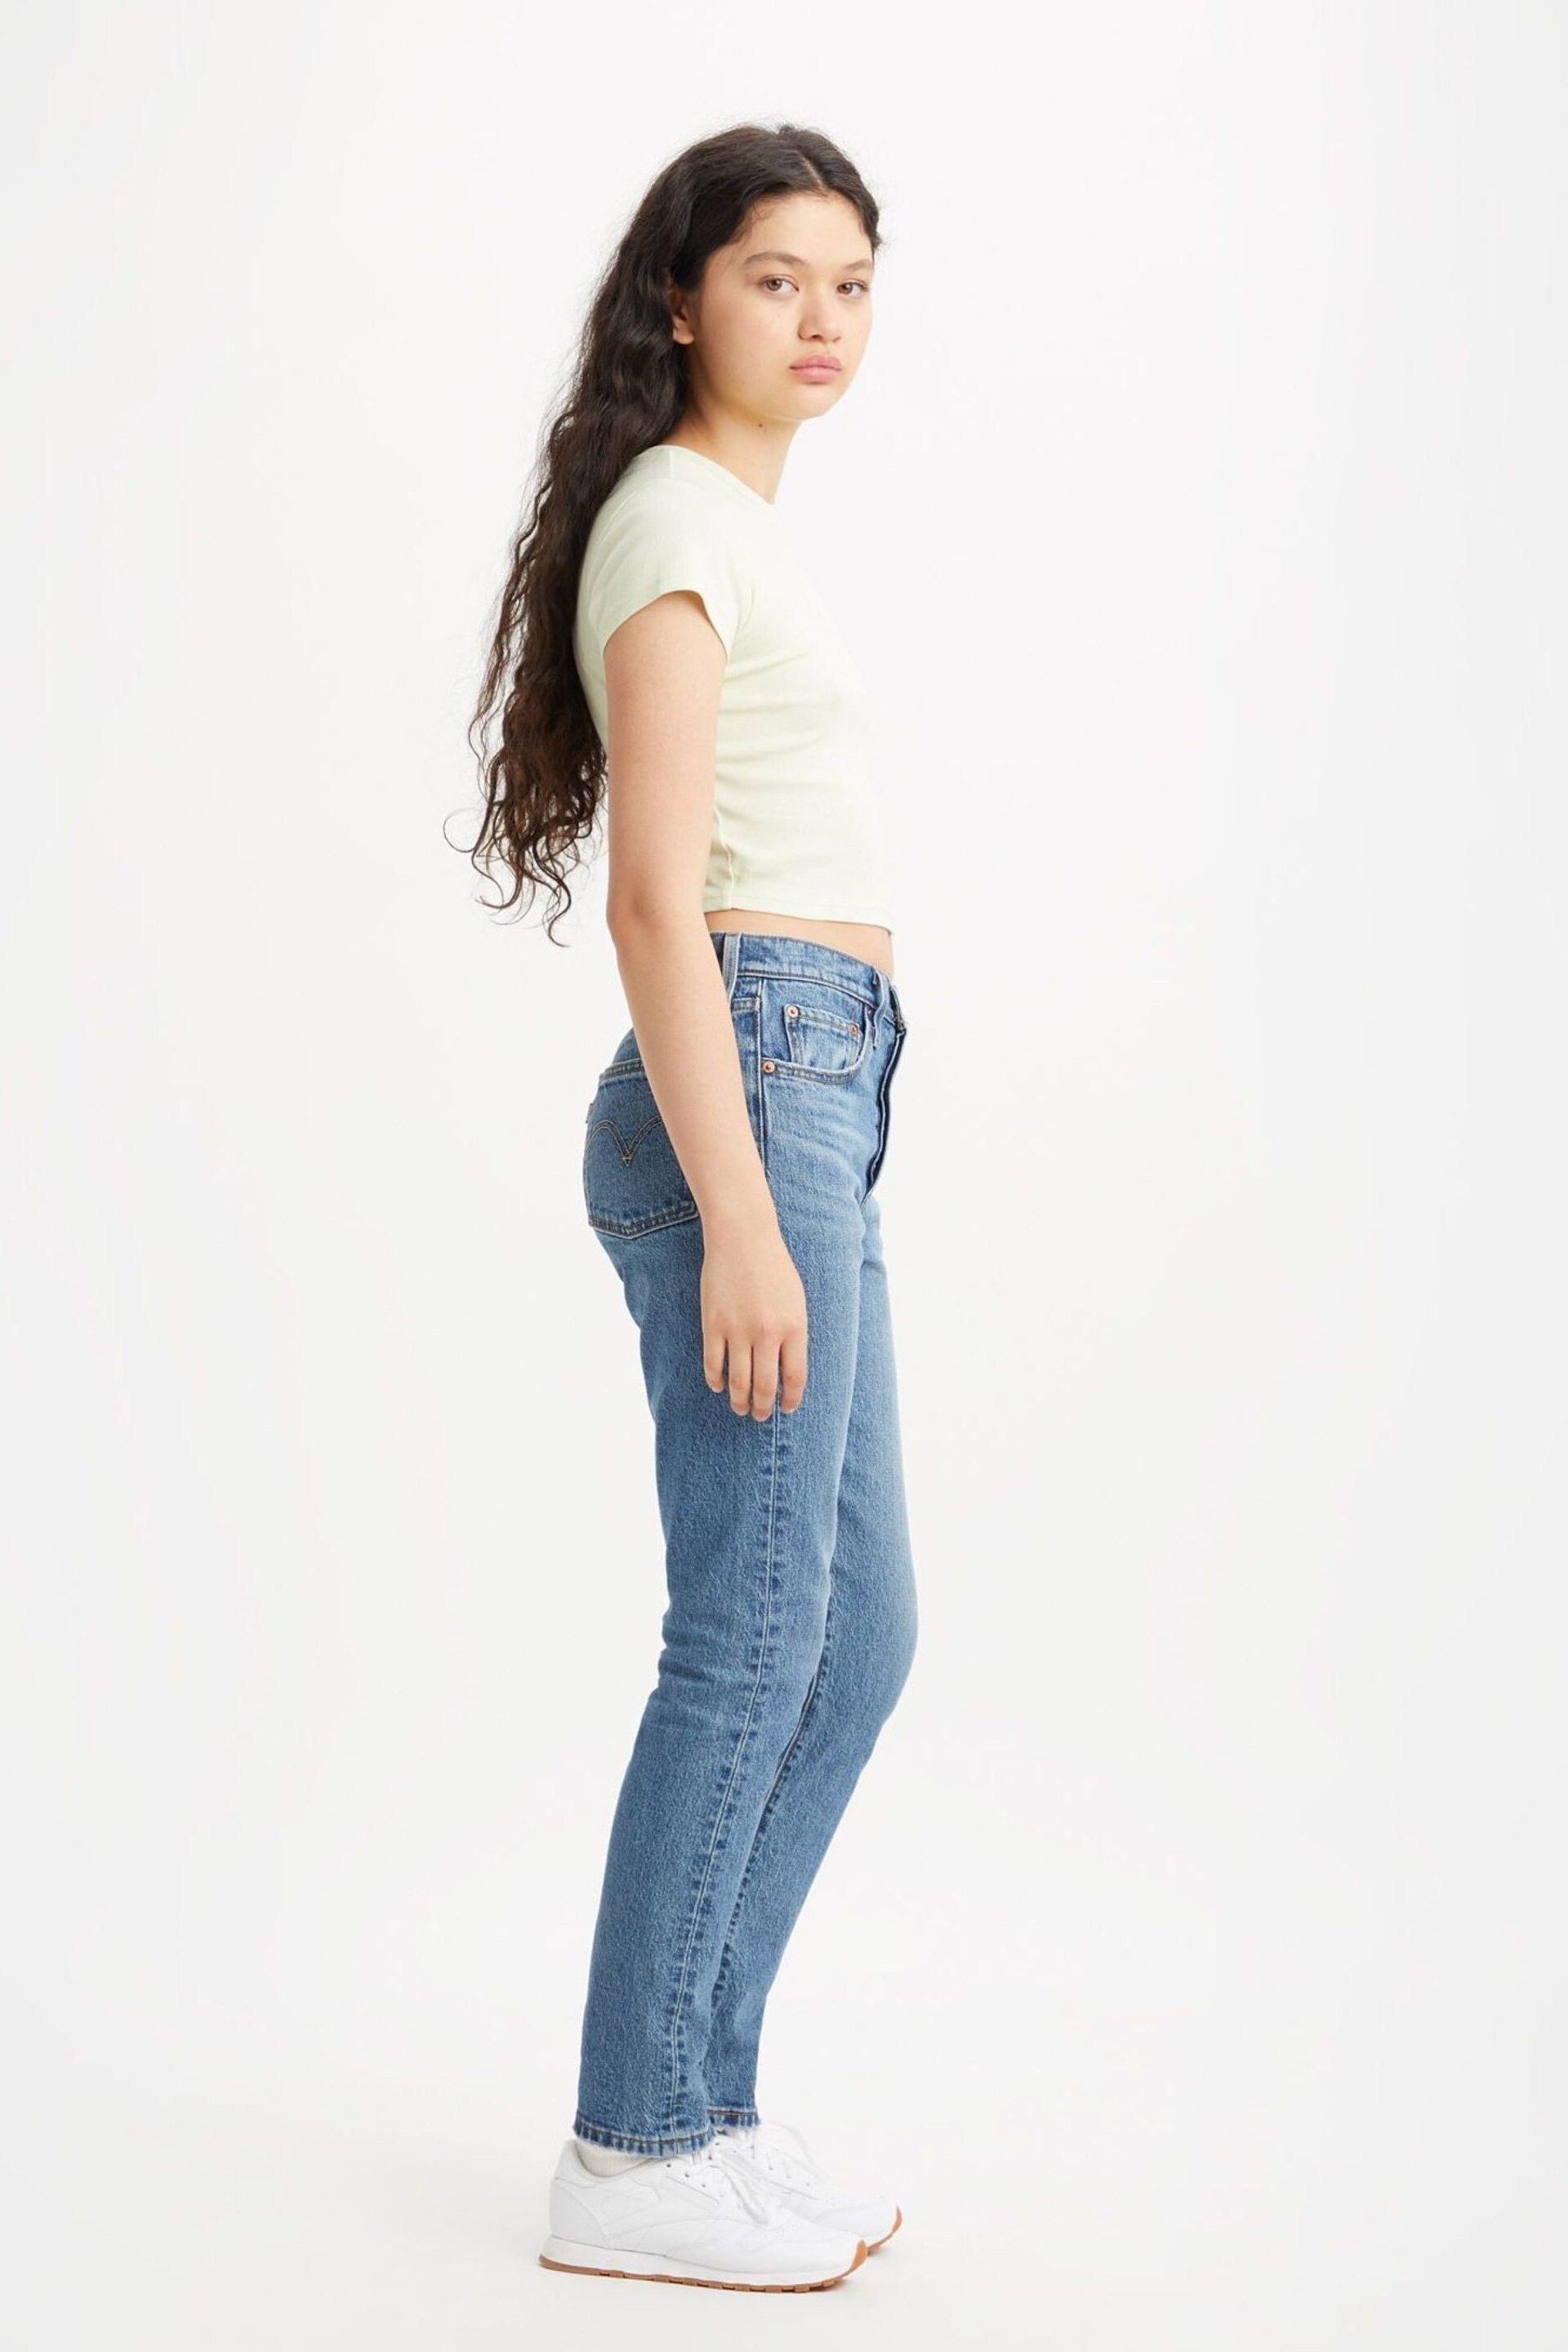 Levi's® Blue Its True Light Wash Blue 501® Youth Skinny Jeans - Image 4 of 8